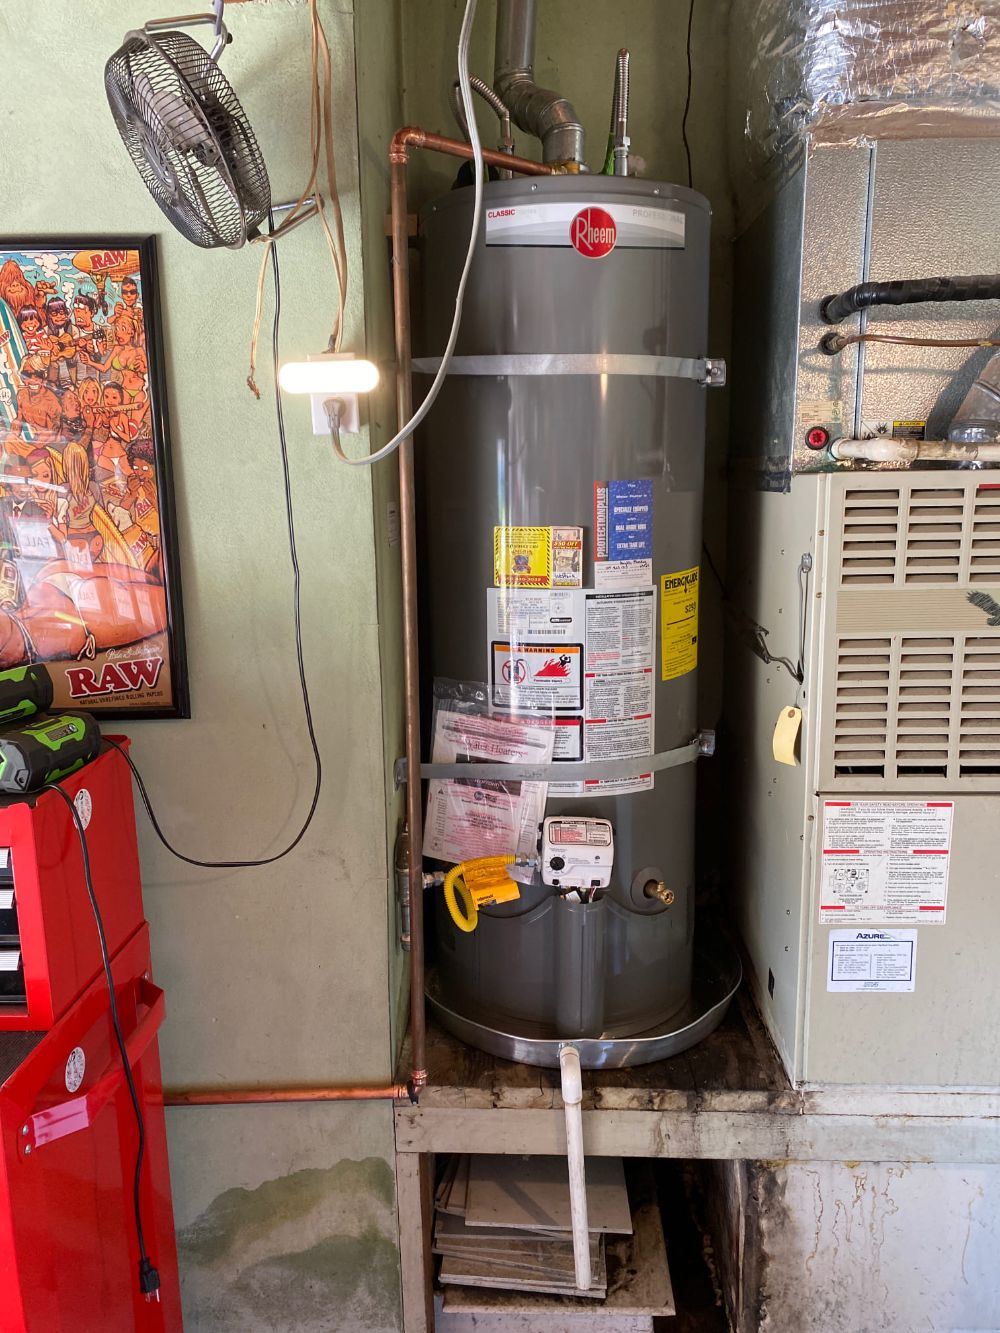 Old Leaking Water Heater Replaced With New Rheem Water Heater In Stockton, CA